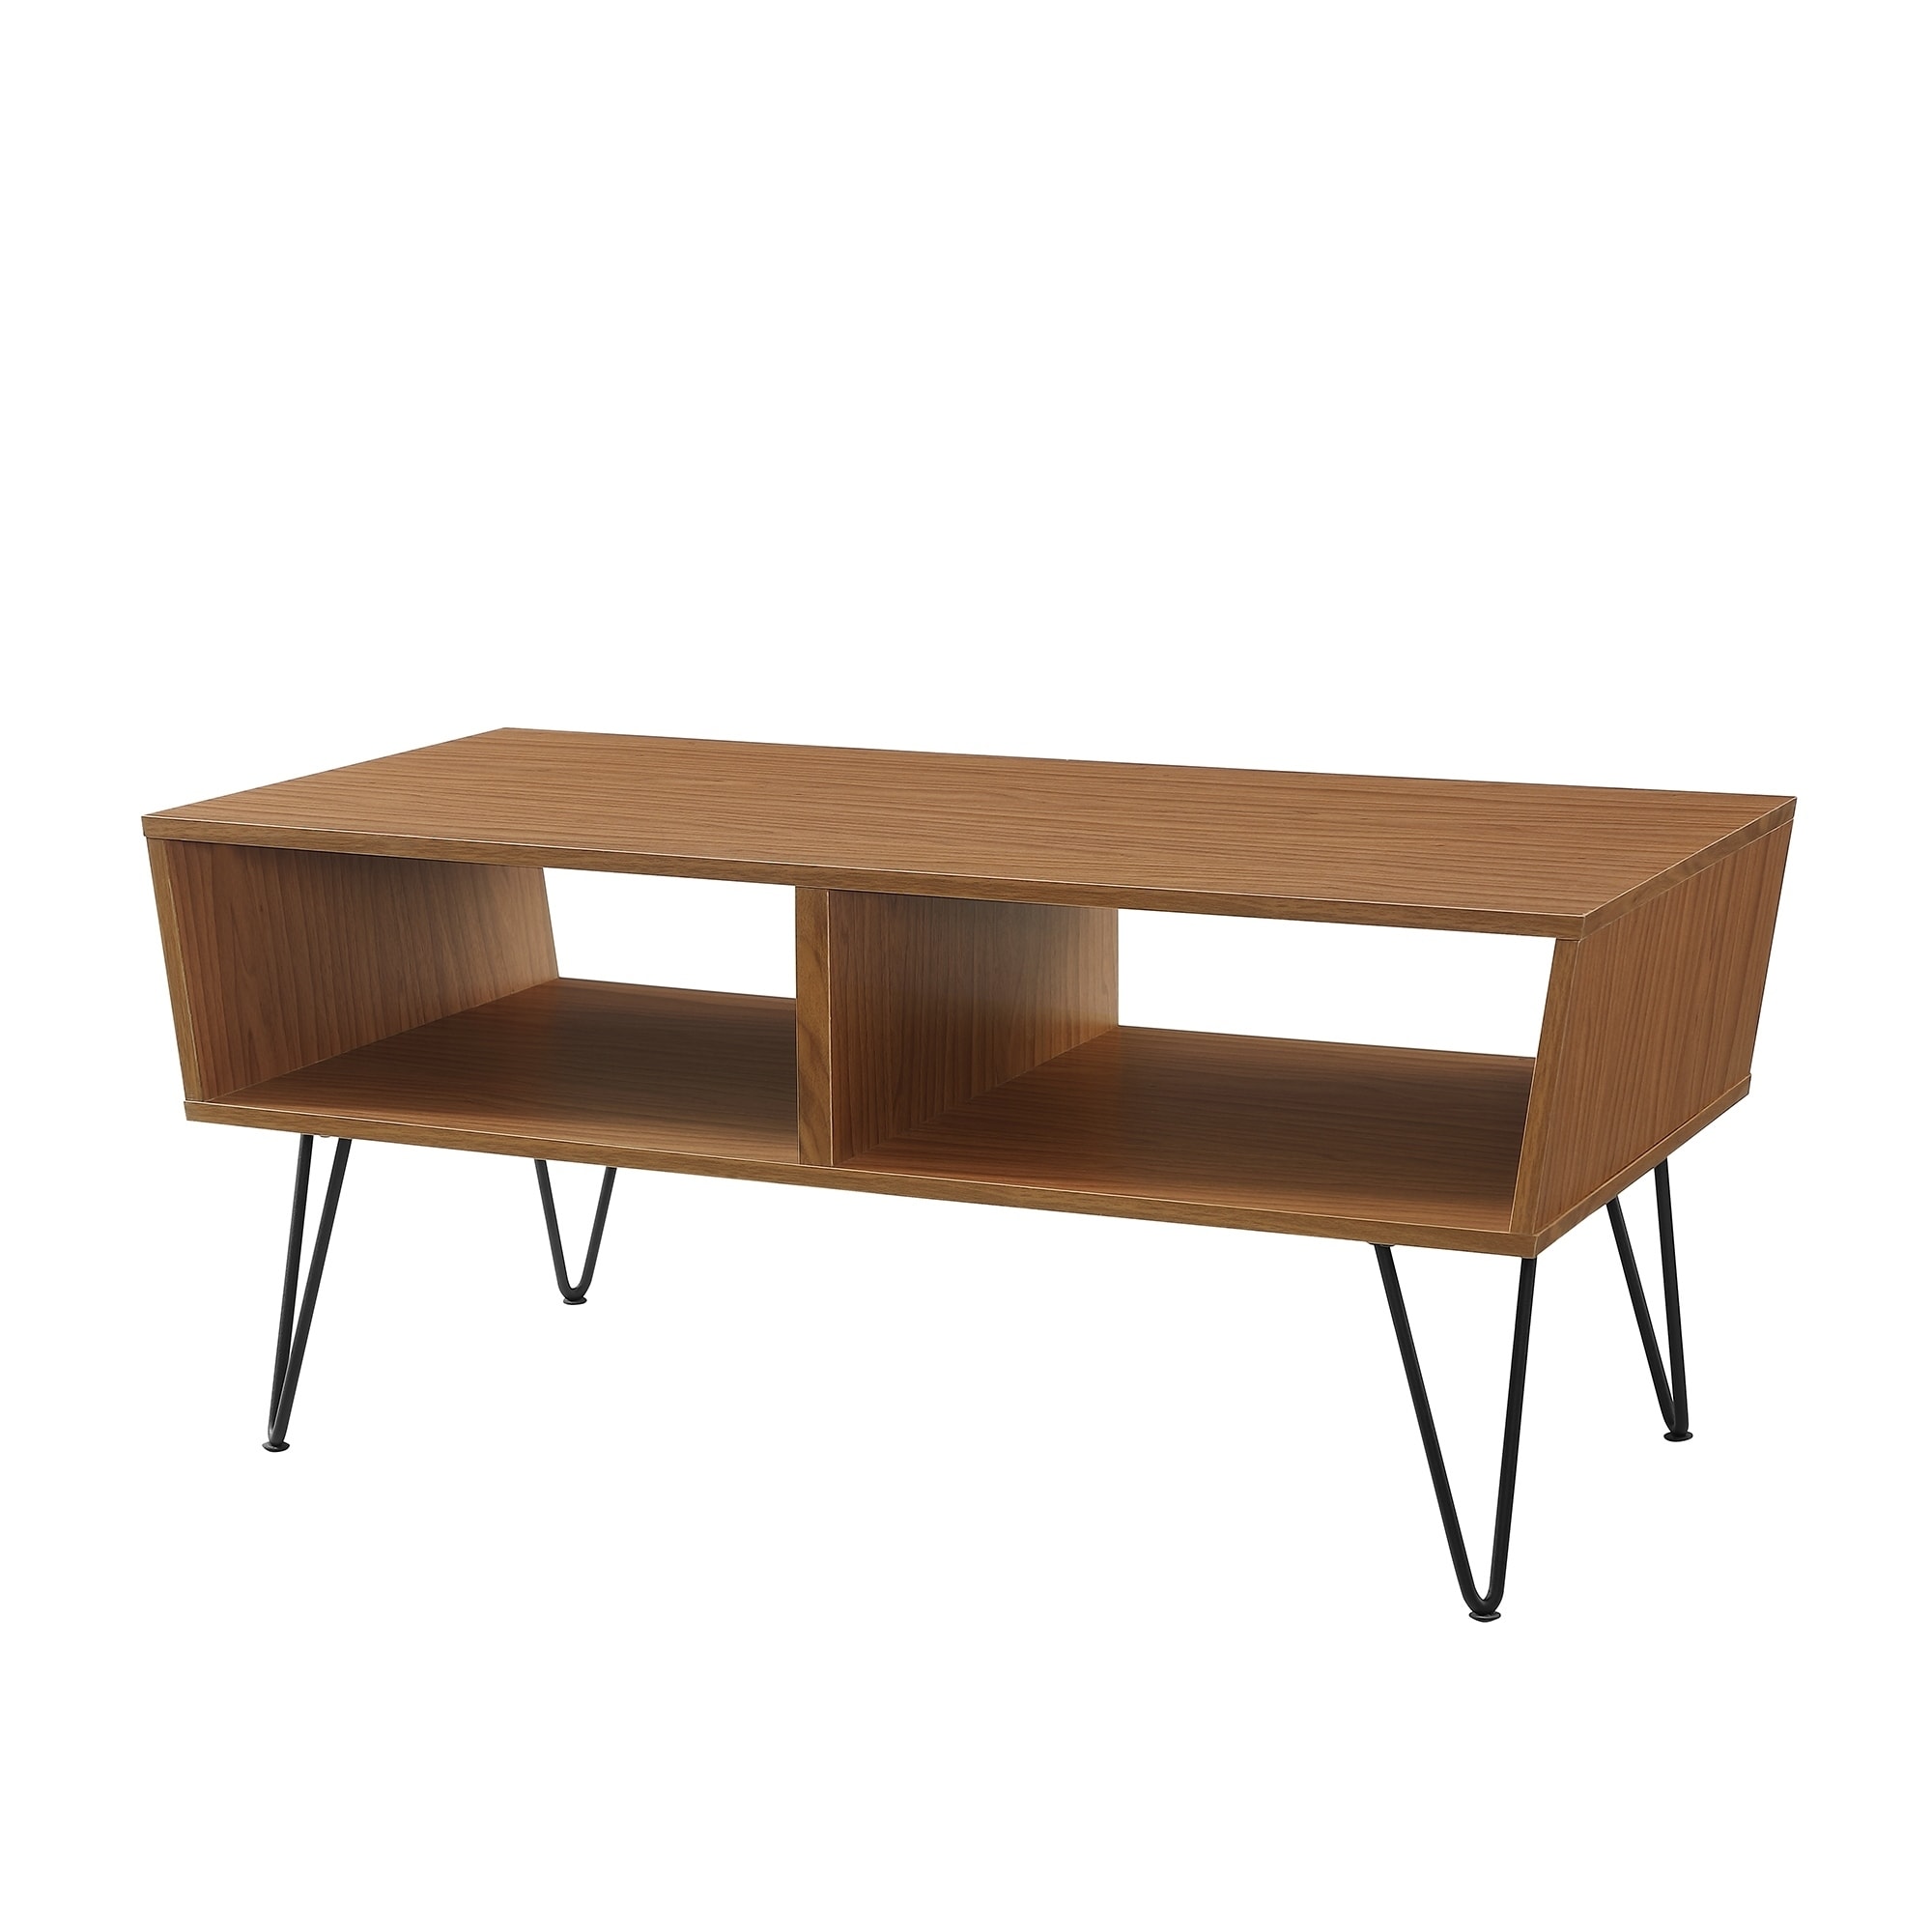 mid century angled coffee table with hairpin legs modern round accent screw free shipping today pottery barn black dining room couches under metal and wood sea themed lamp shades